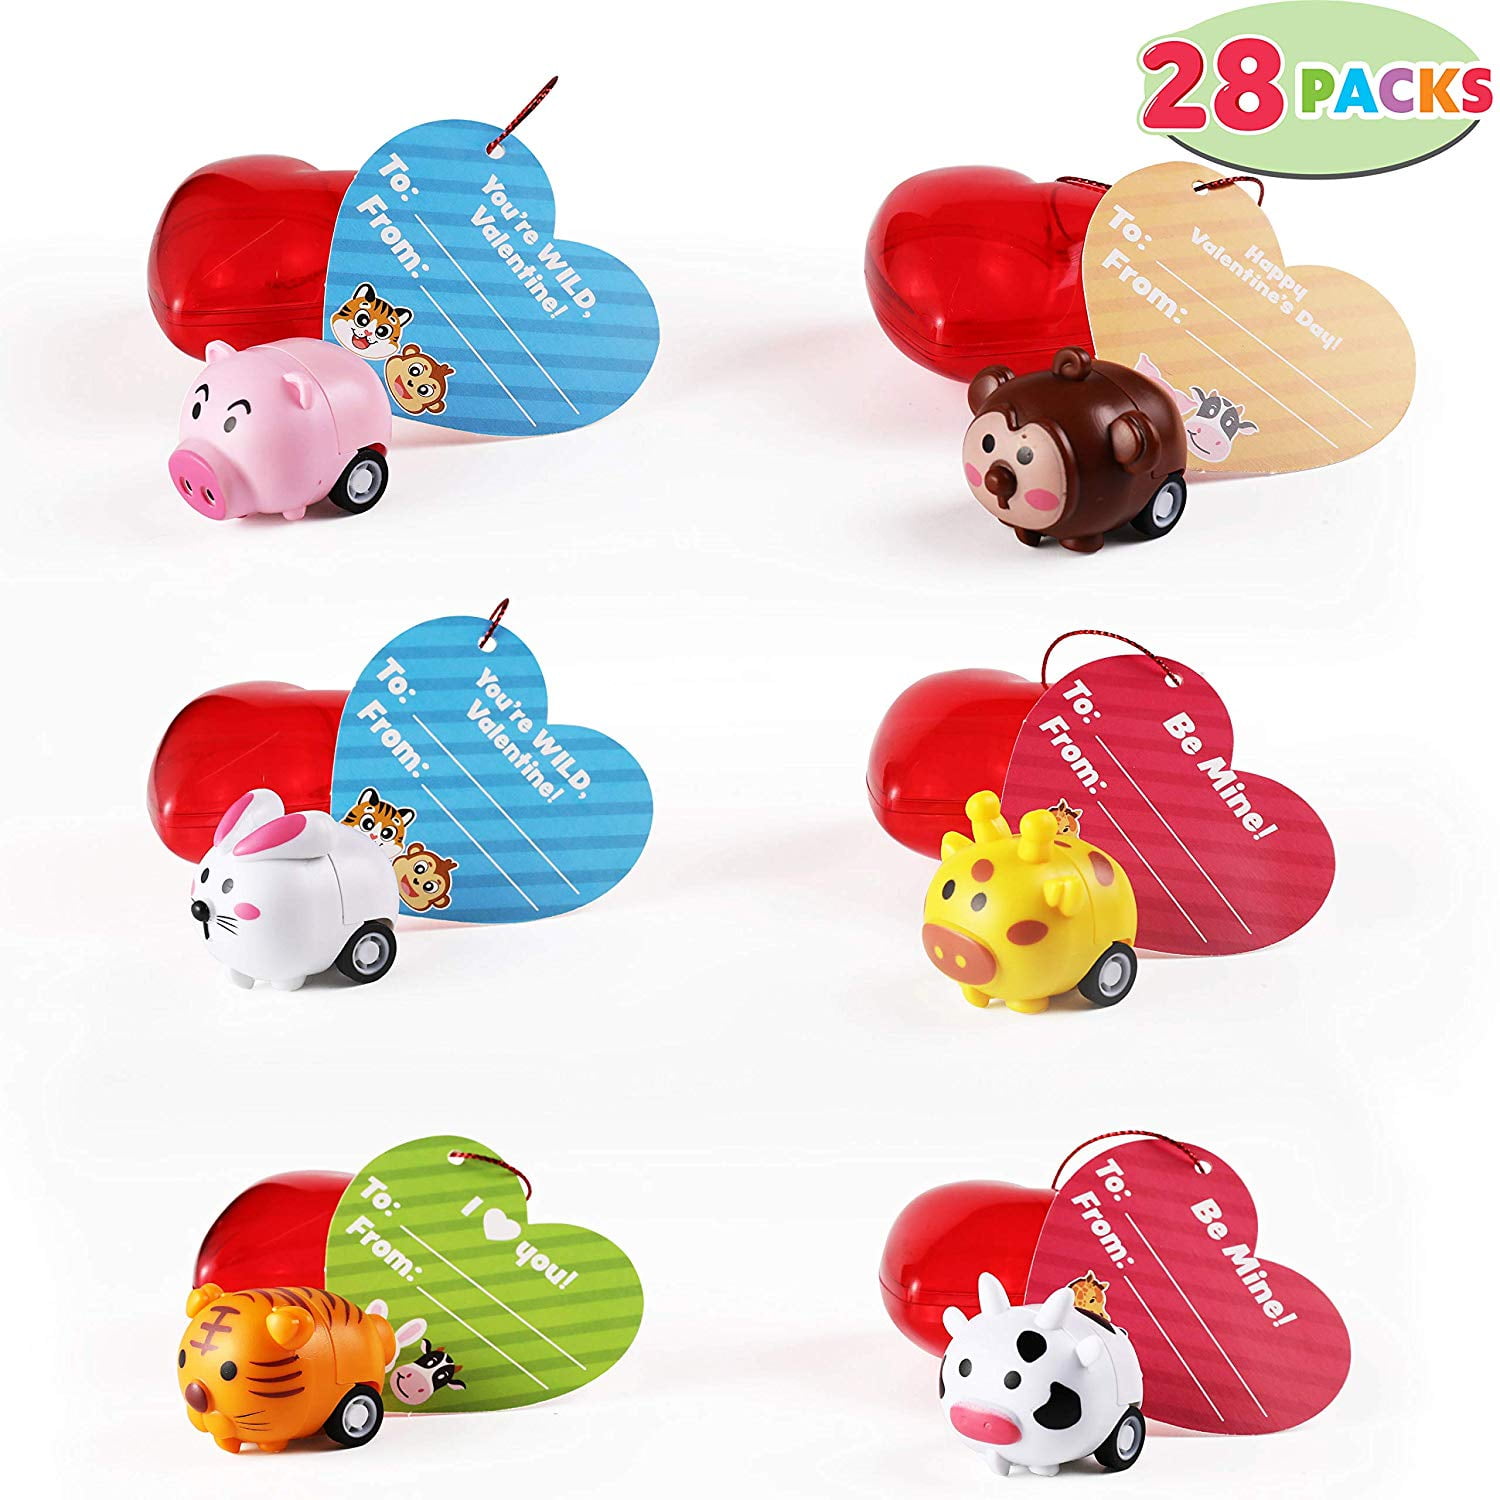 Game Prizes Gift Exchange JOYIN 30 Valentines Day Pre Filled Hearts with Animal Pullback Cars for Kids Valentine Classroom Exchange Cute Animal Pull Back Vehicle Toys for Valentine Party Favors 